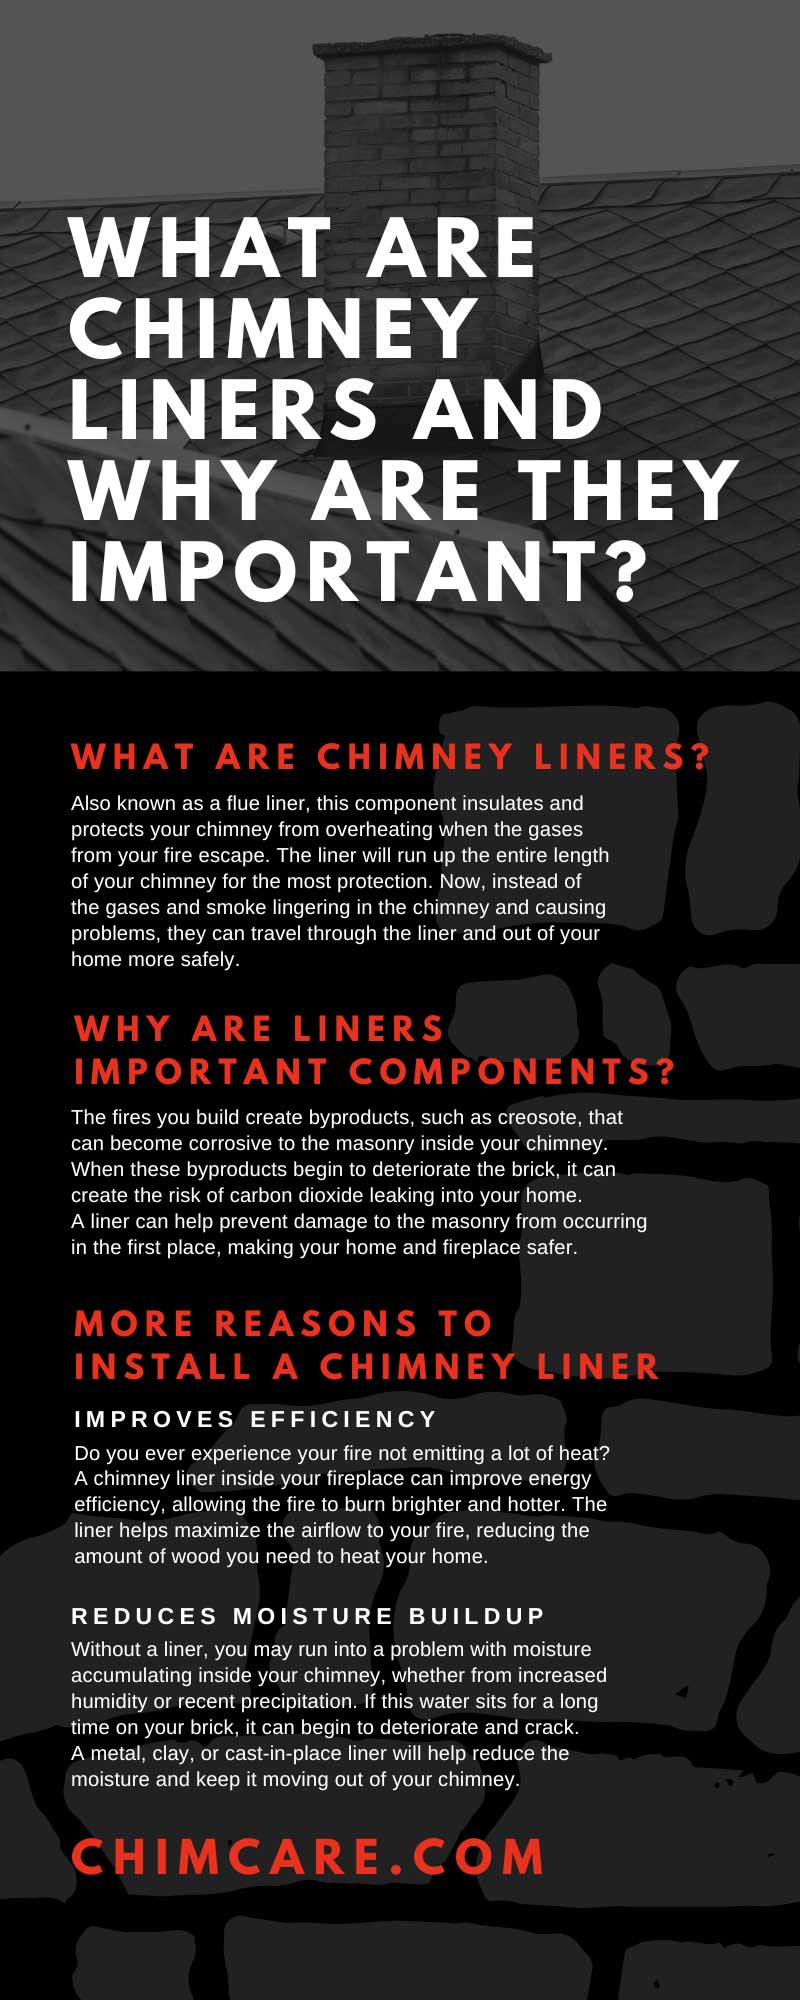 What Are Chimney Liners and Why Are They Important?